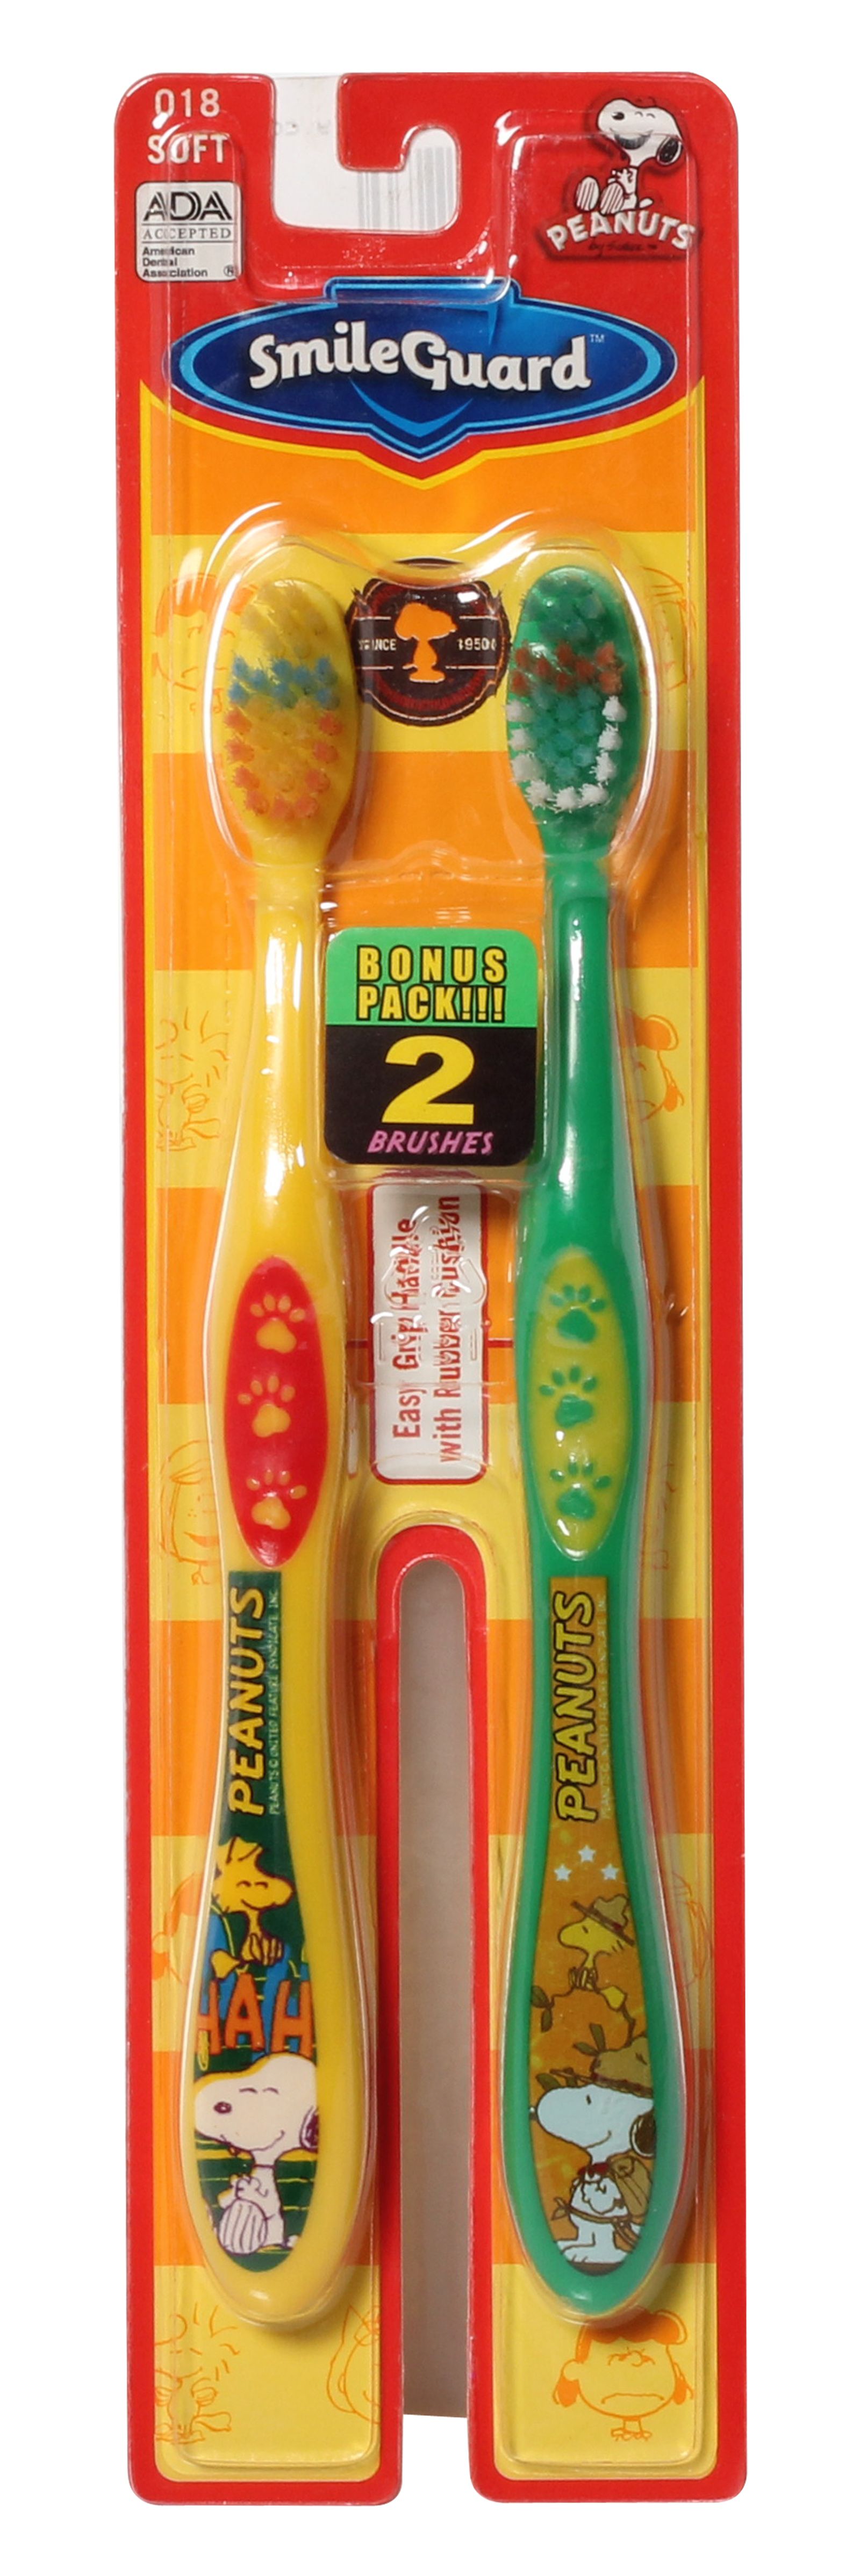 Baby Tooth Brushes - Pack of Two